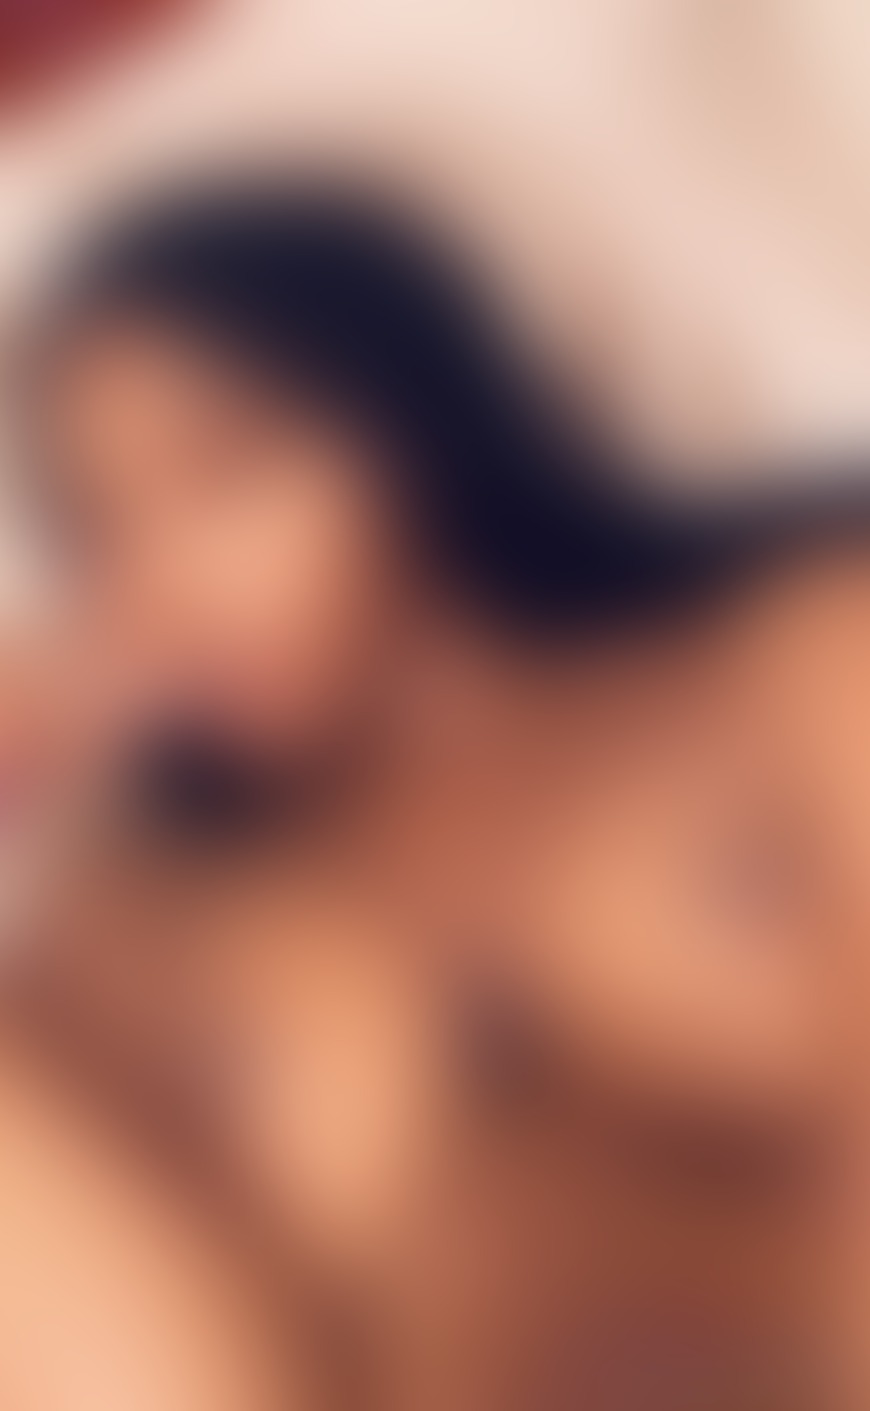 Some full nudes with face in it for you guys 👀🙌🏽😘 - post hidden image